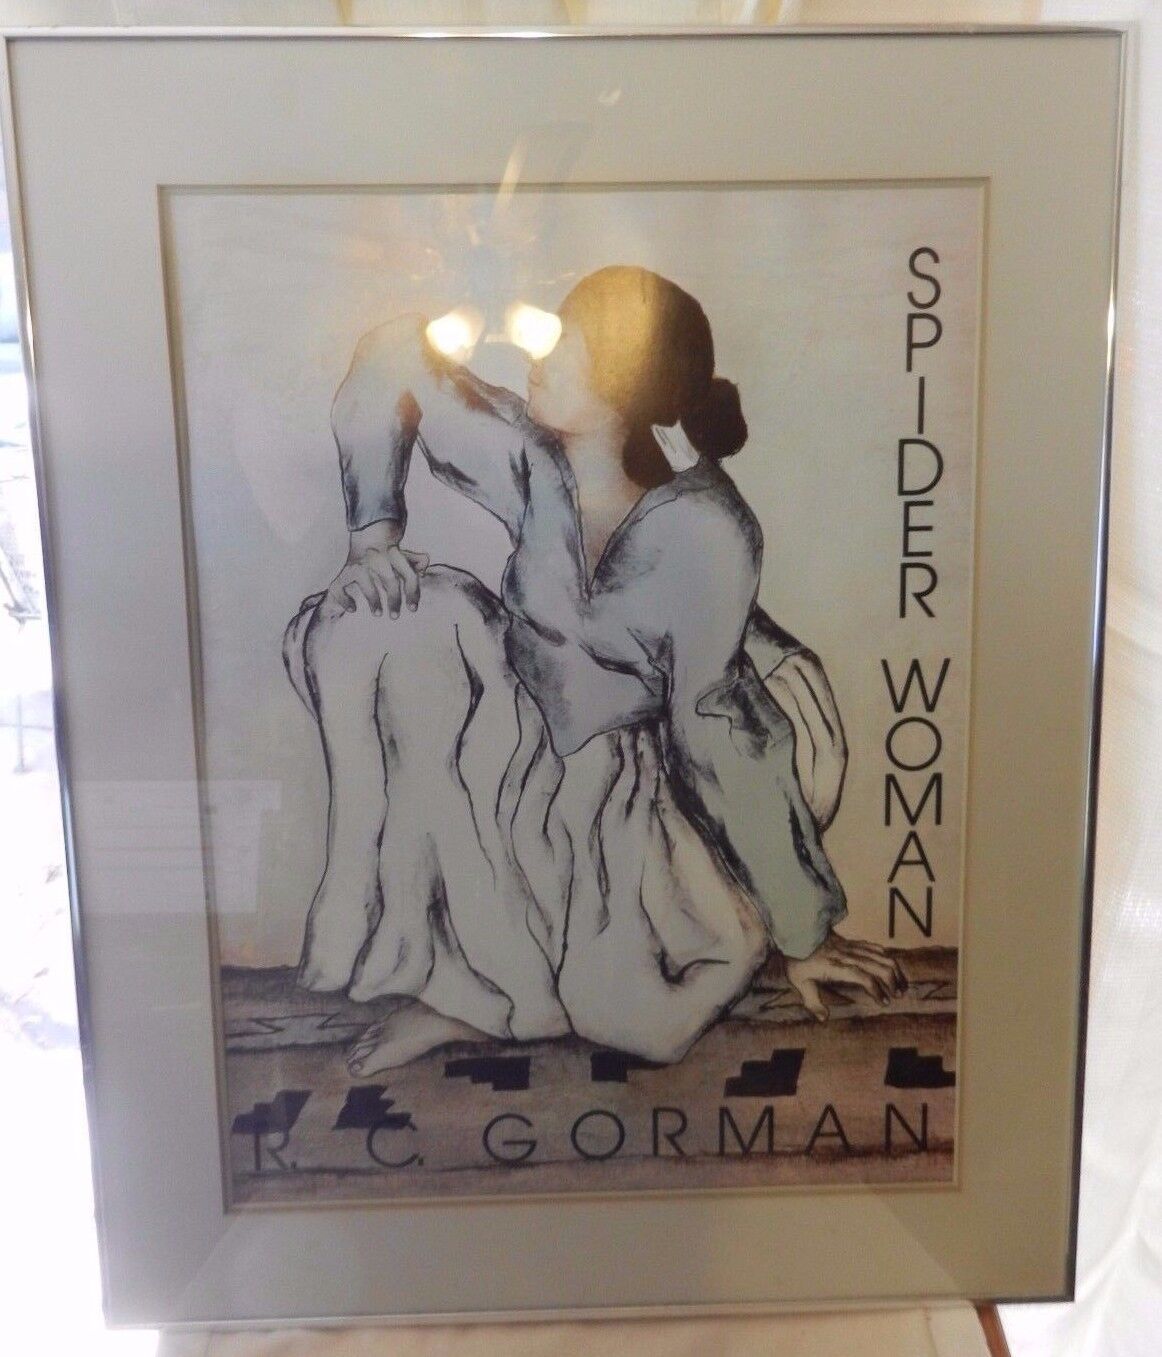 RC Gorman Spider Woman Native American Framed & Matted Print 